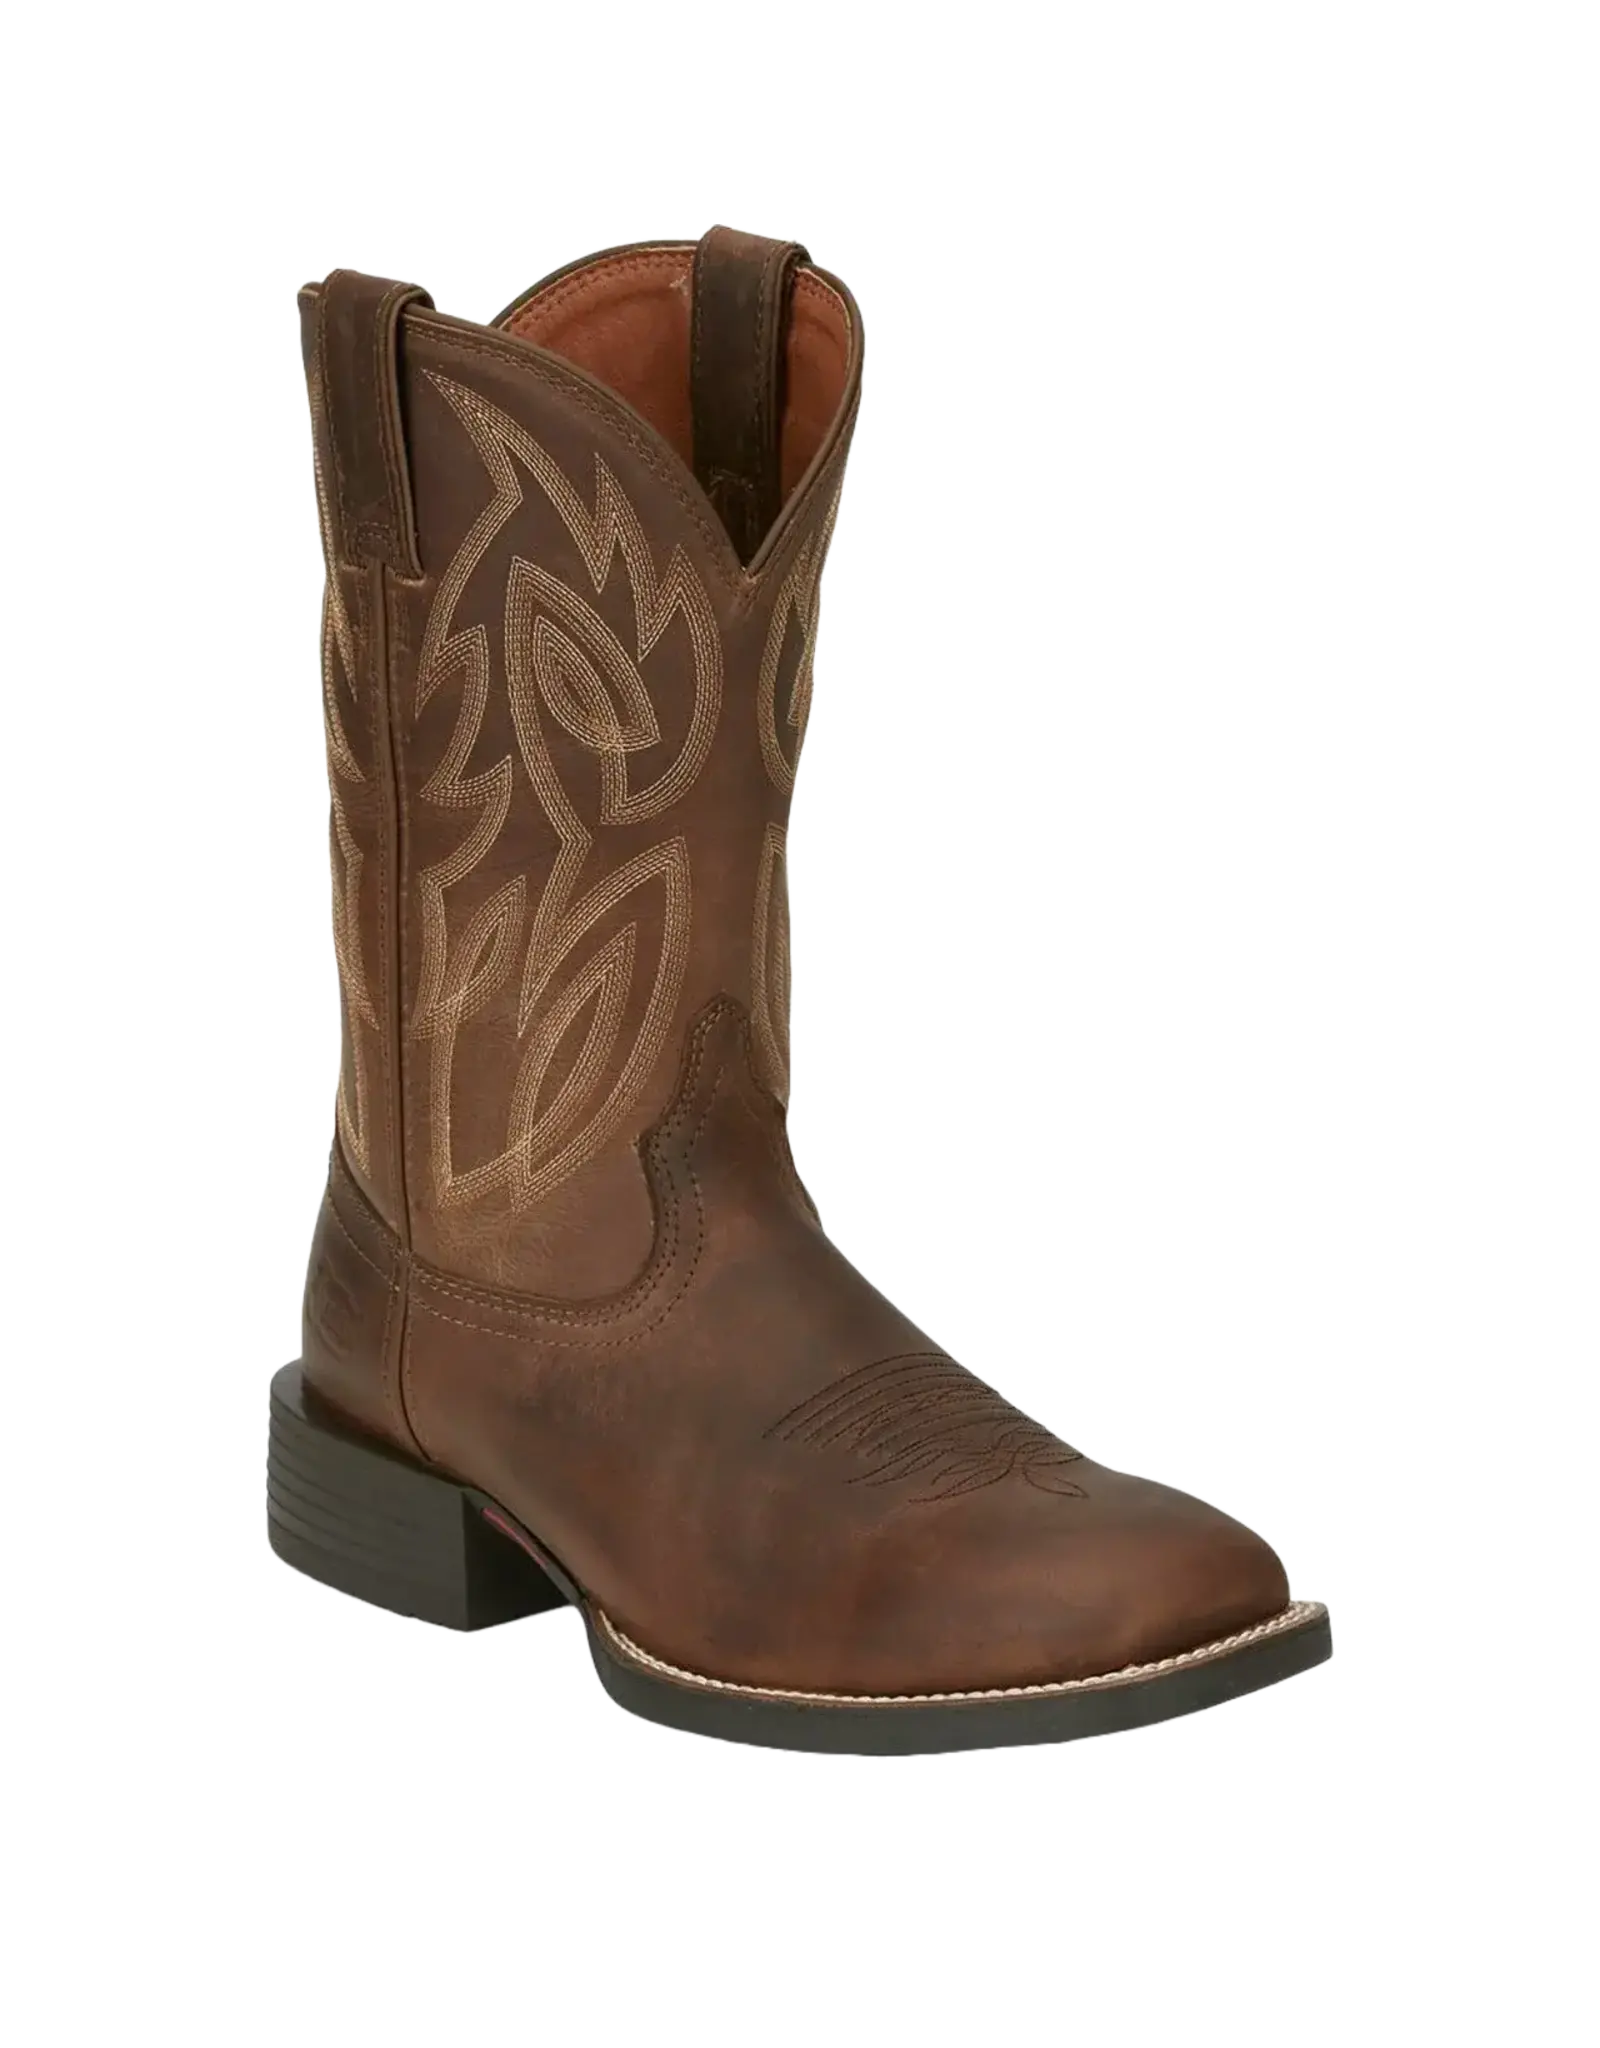 Justin Justin Canter Dusky Brown Cowhide  Western Boot SE 7510